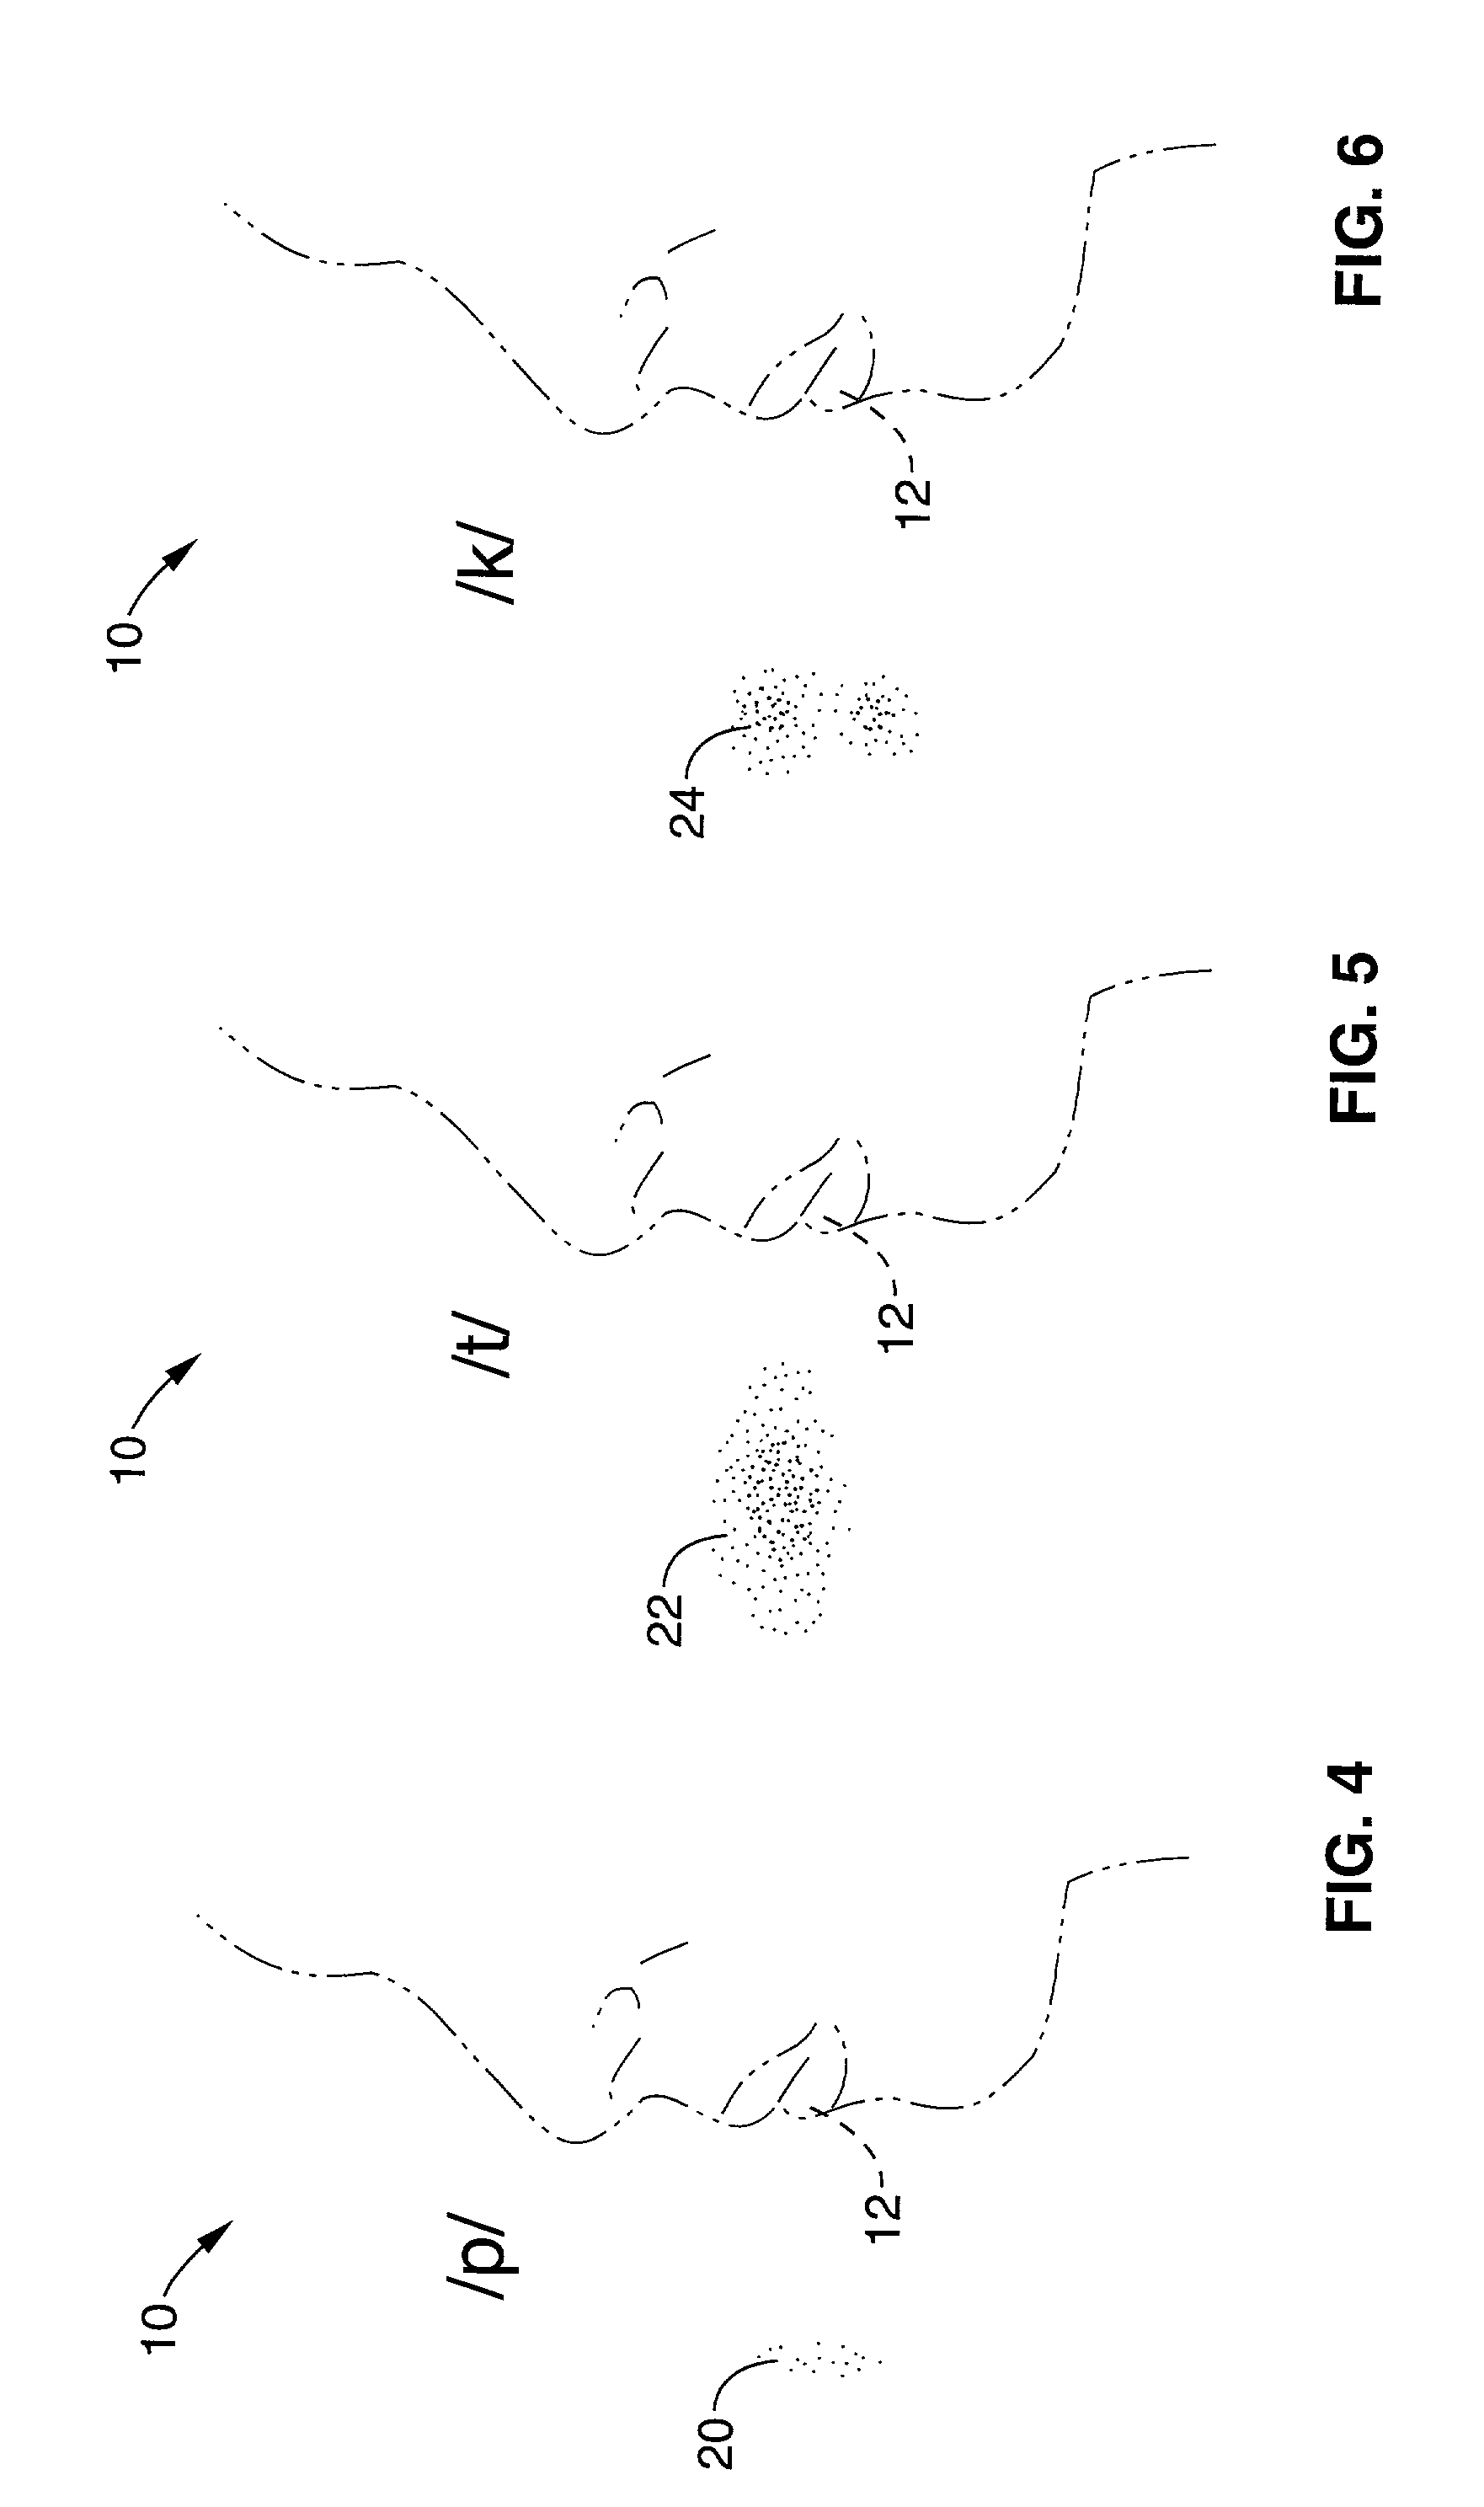 Visual display methods for in computer-animated speech production models